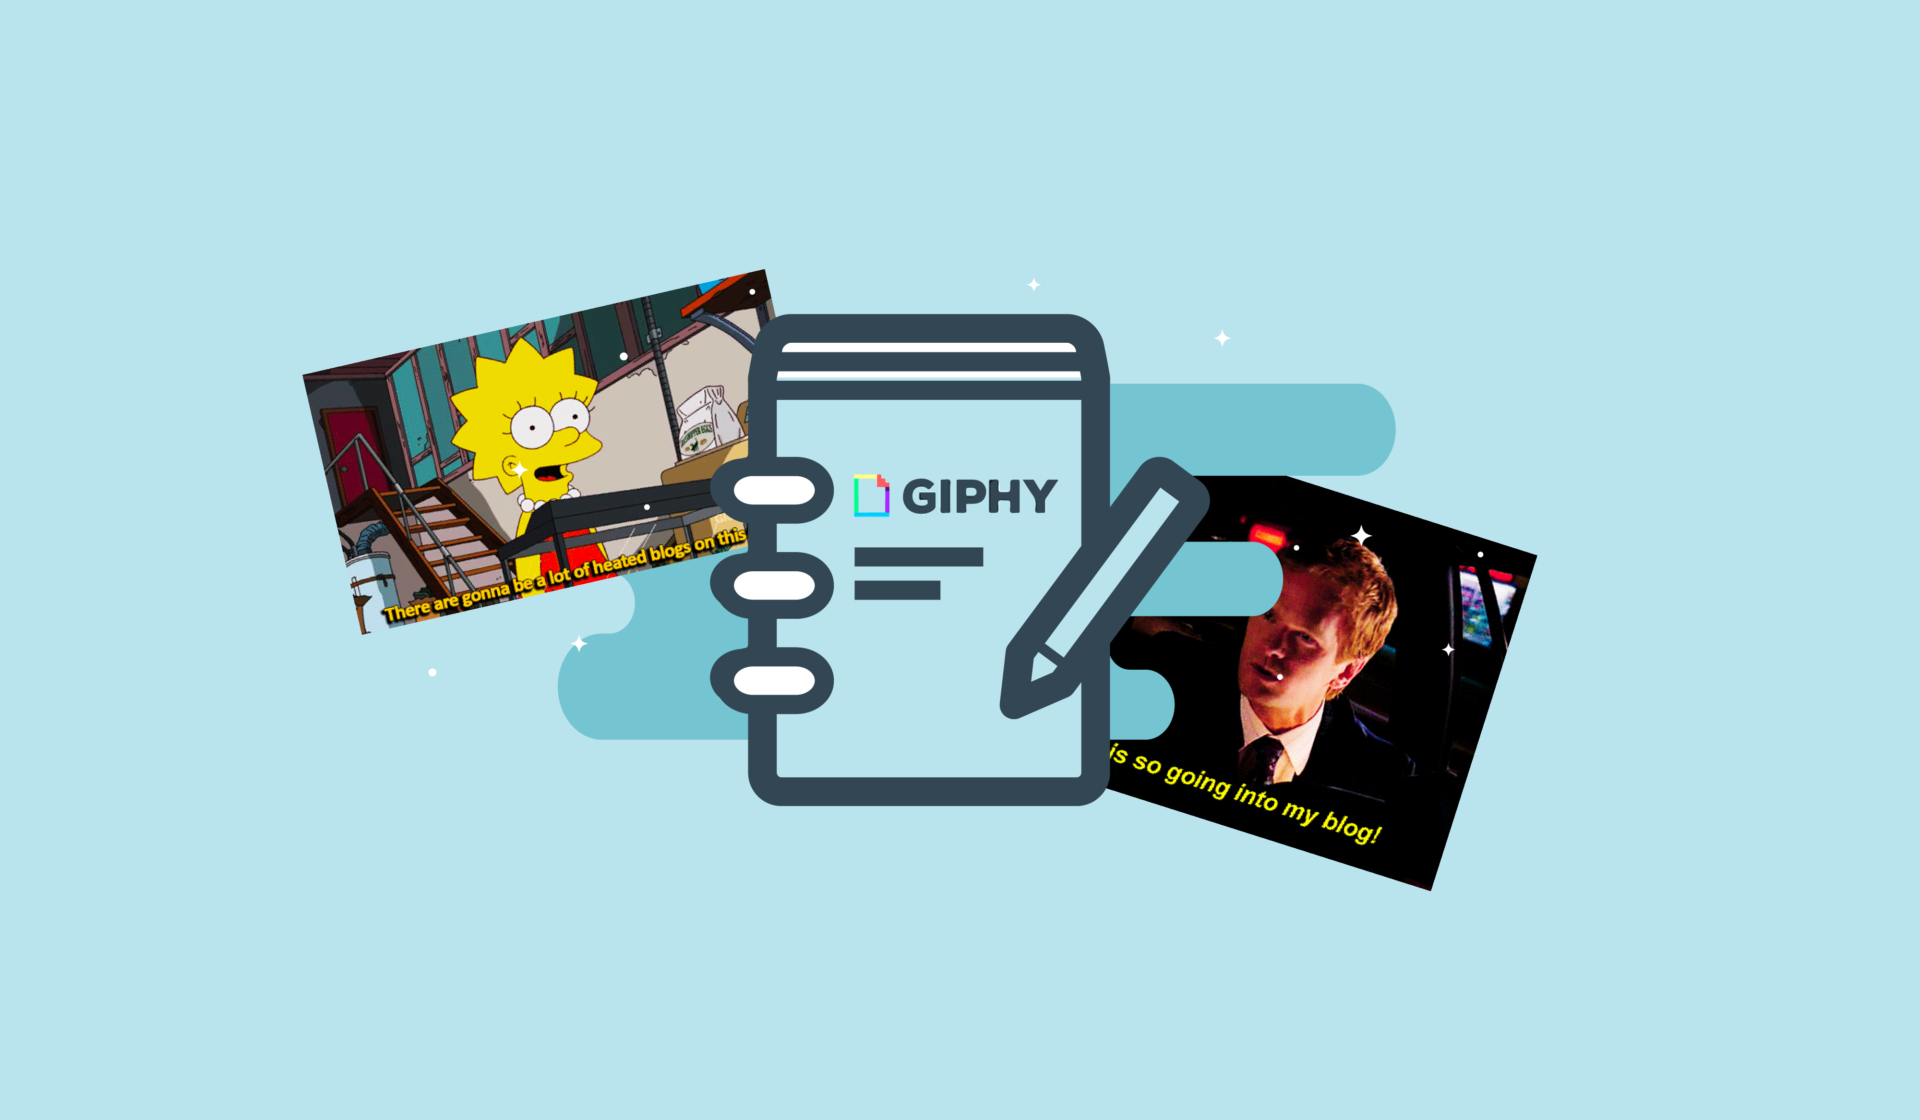 Using GIFs and memes in marketing